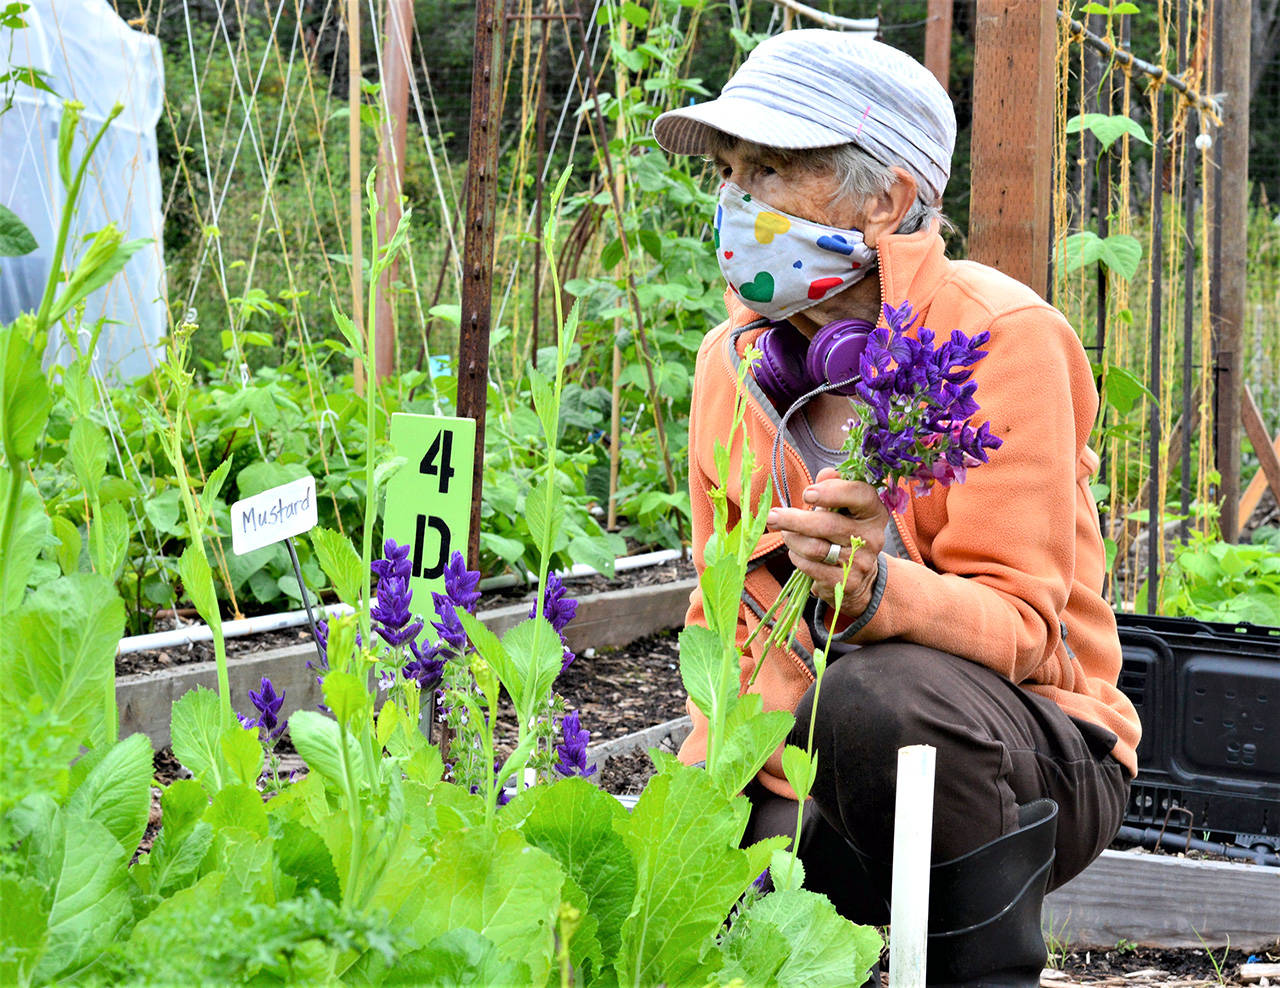 Quimper Grange garden volunteer Jo Yount cultivates greens and flowers especially for the clients of the Port Townsend Food Bank. (Diane Urbani de la Paz/Peninsula Daily News)